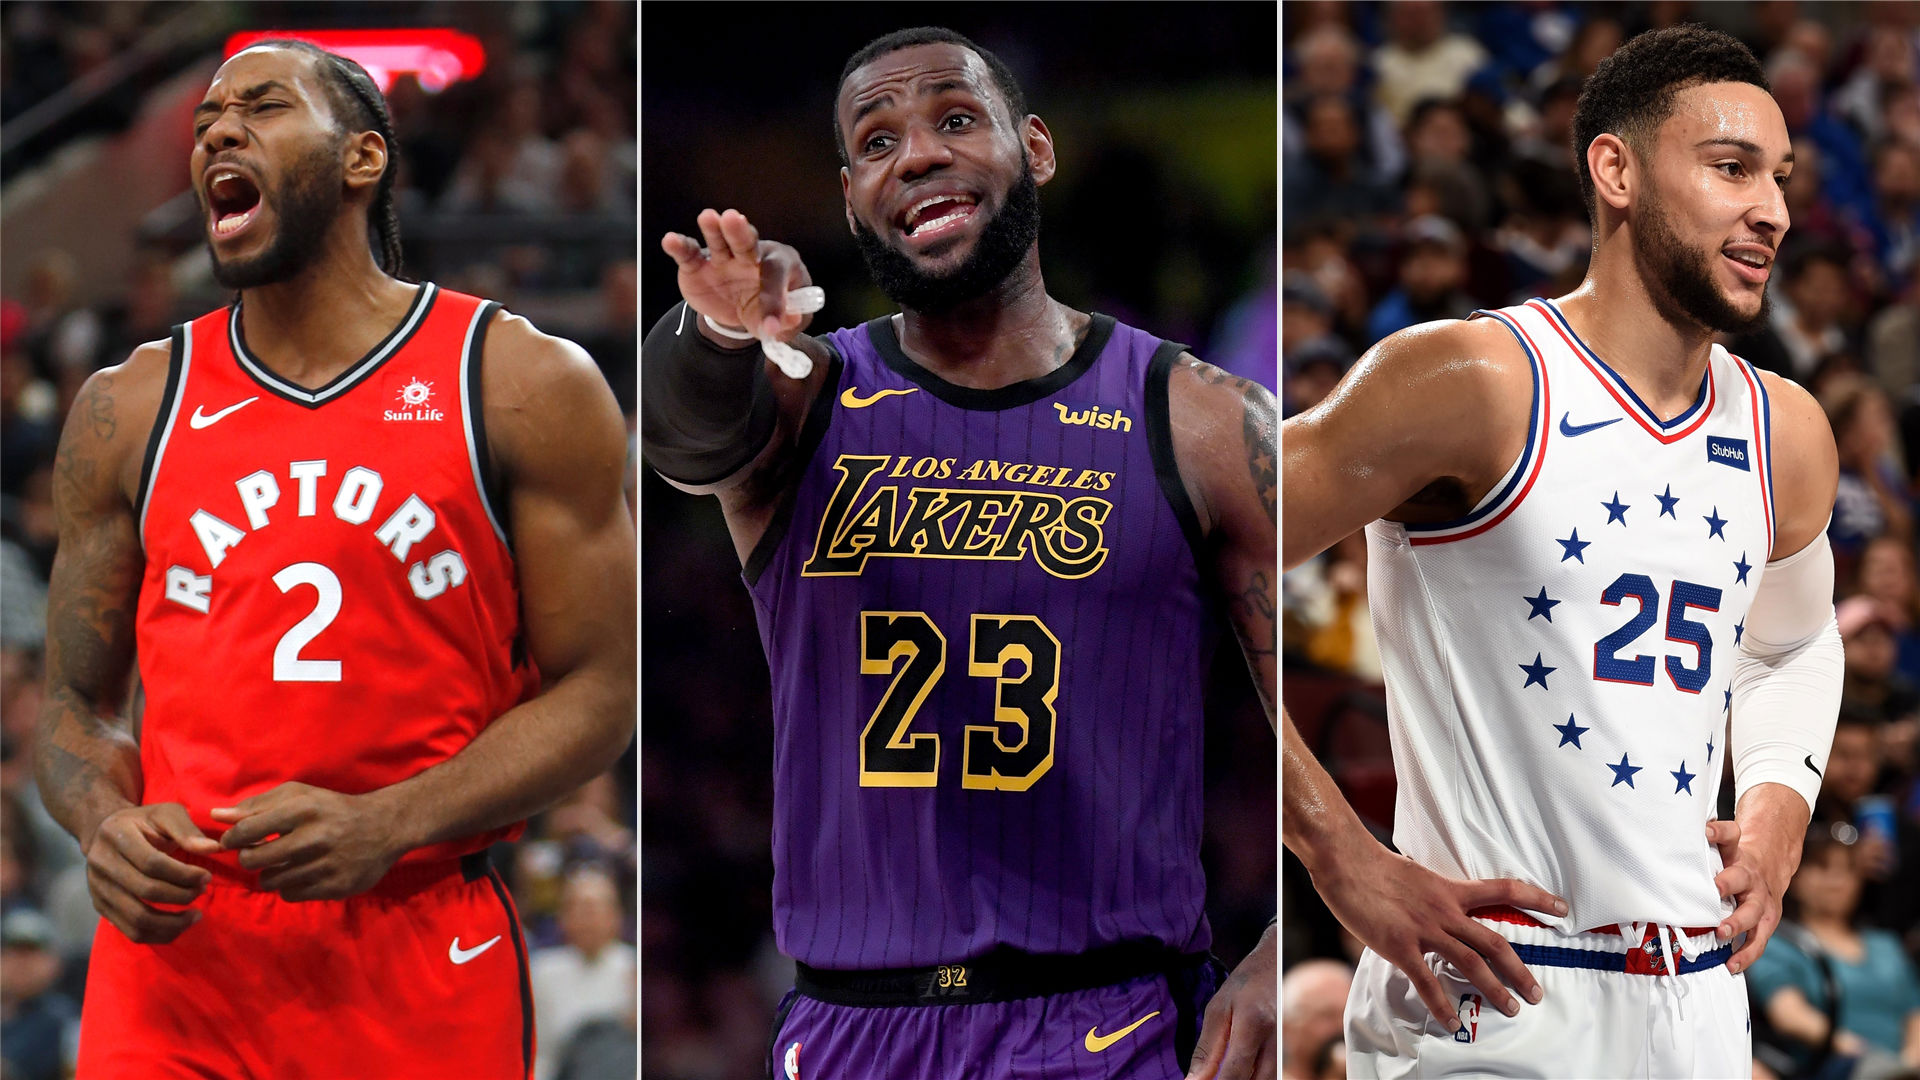 NBA All-Star Game 2019: Takeaways from the second fan vote results | Sporting News1920 x 1080